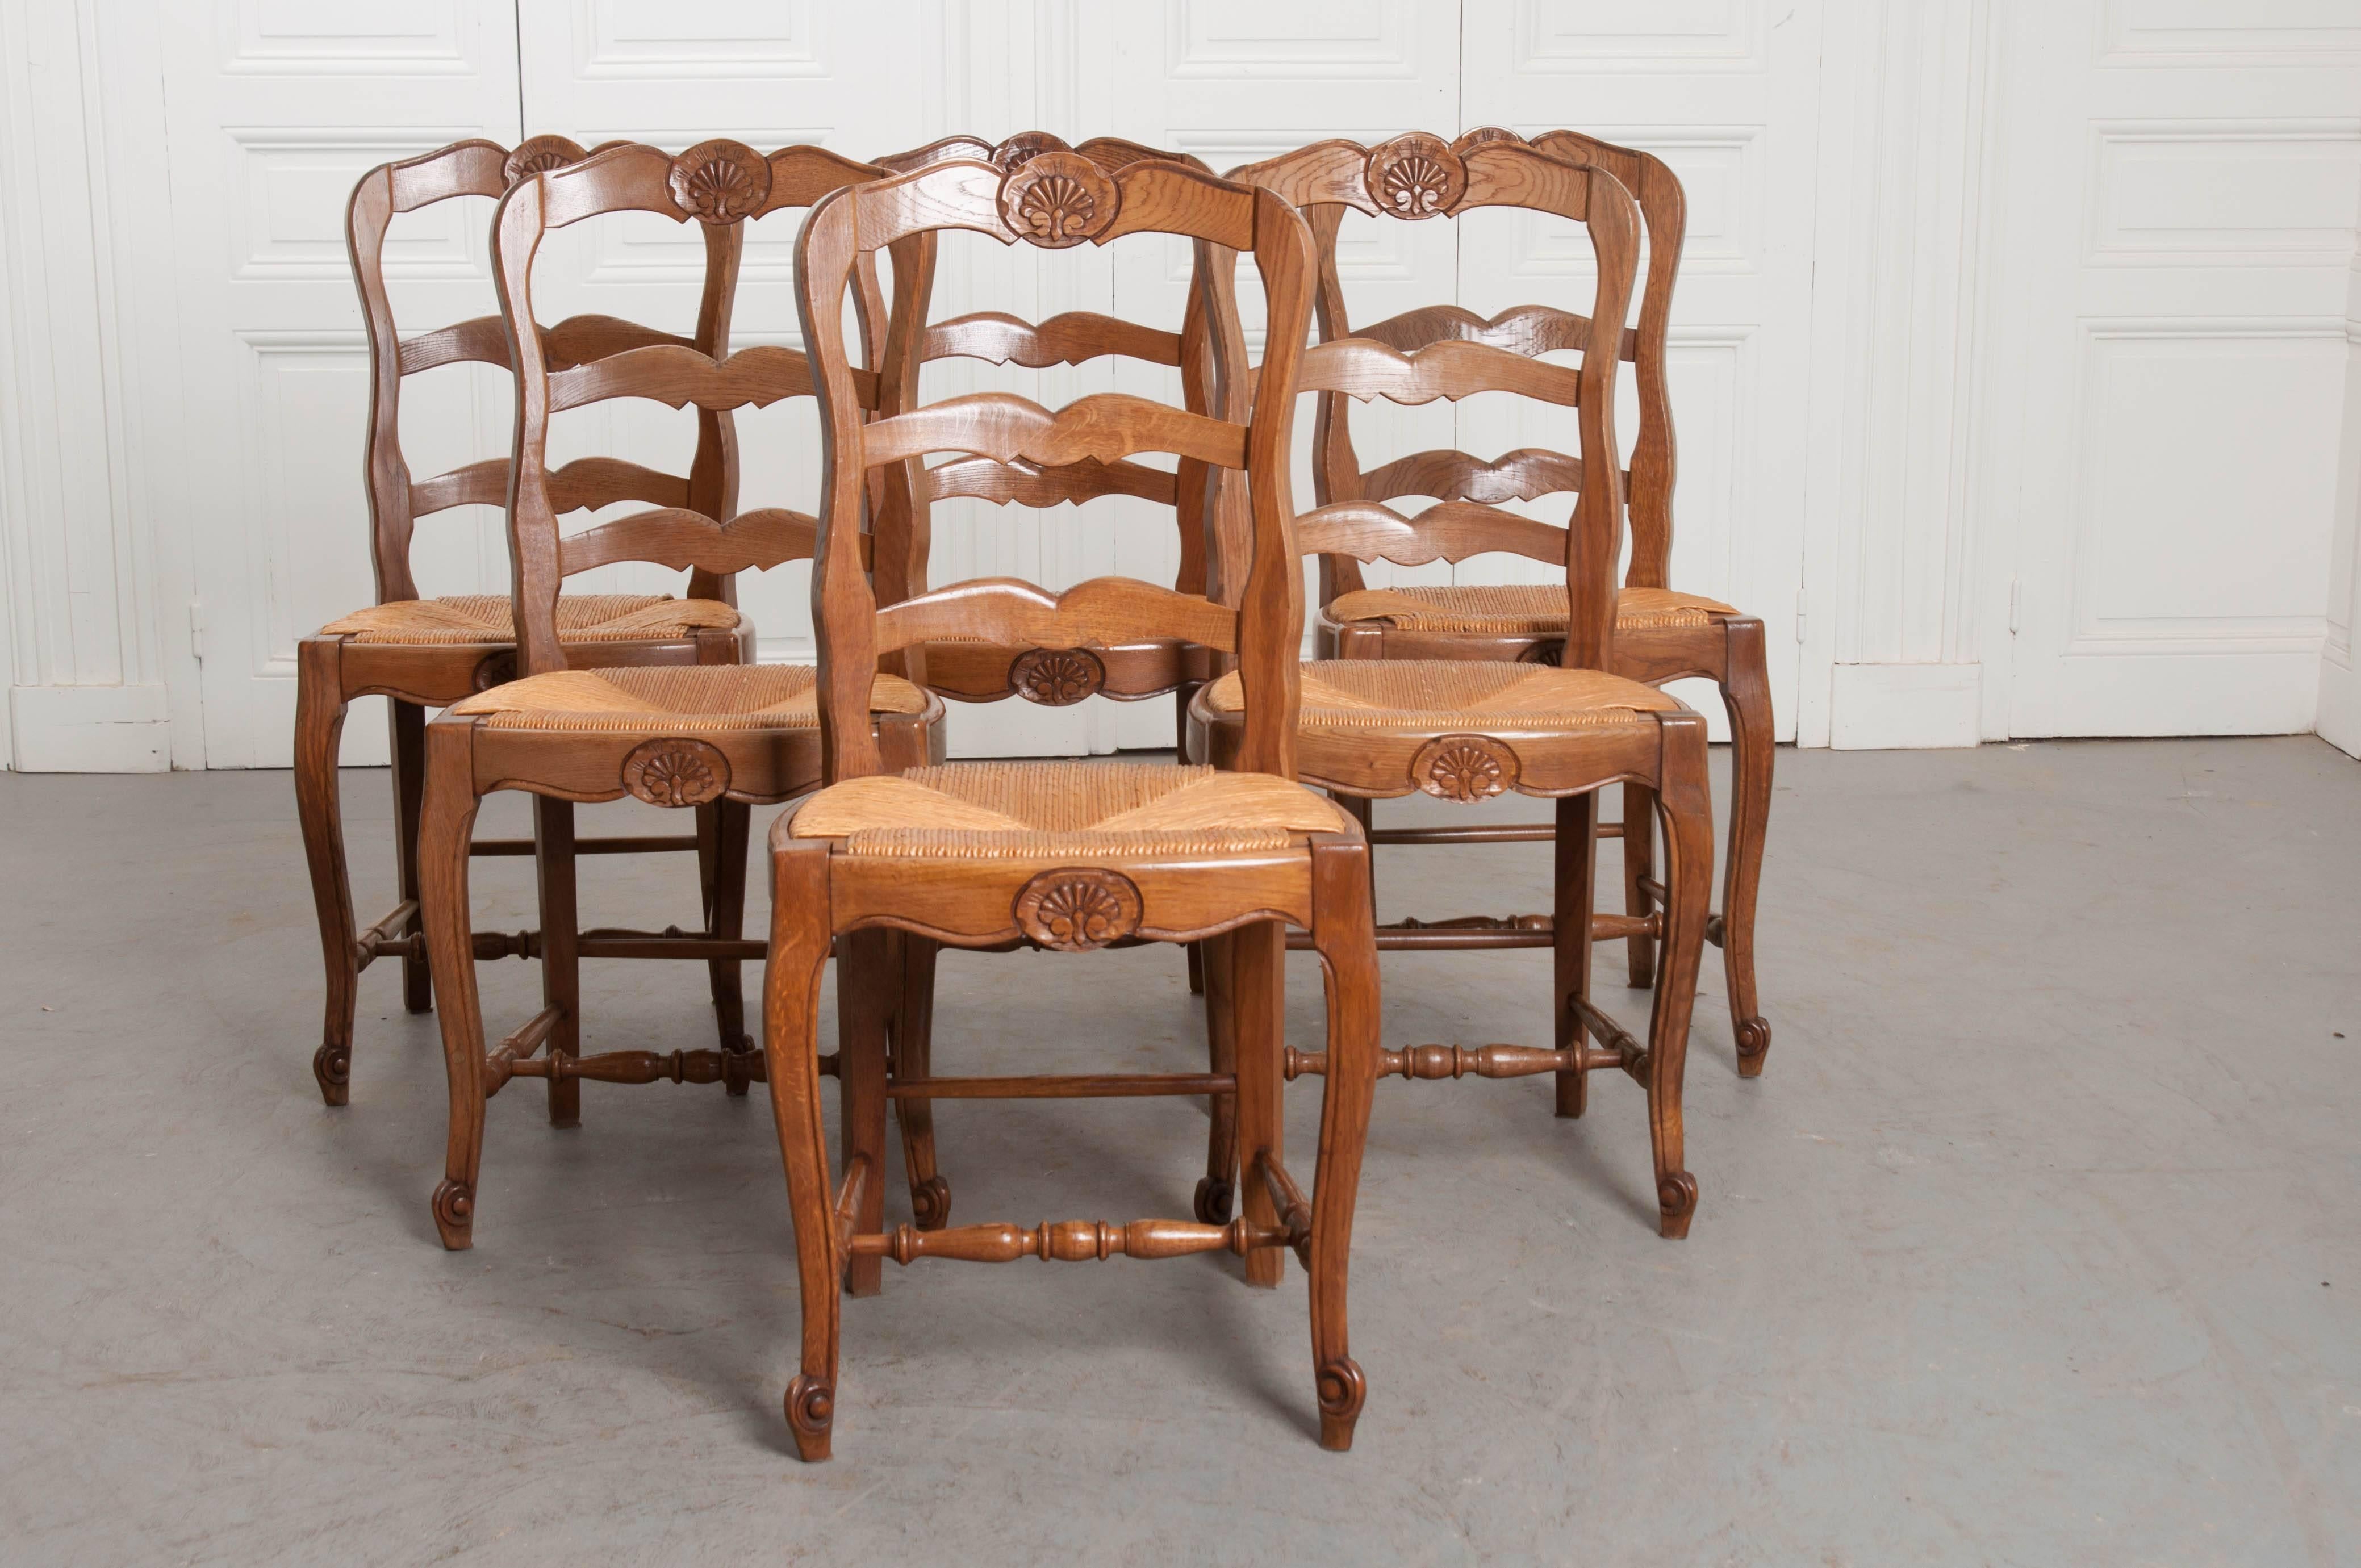 ladderback chairs with rush seats